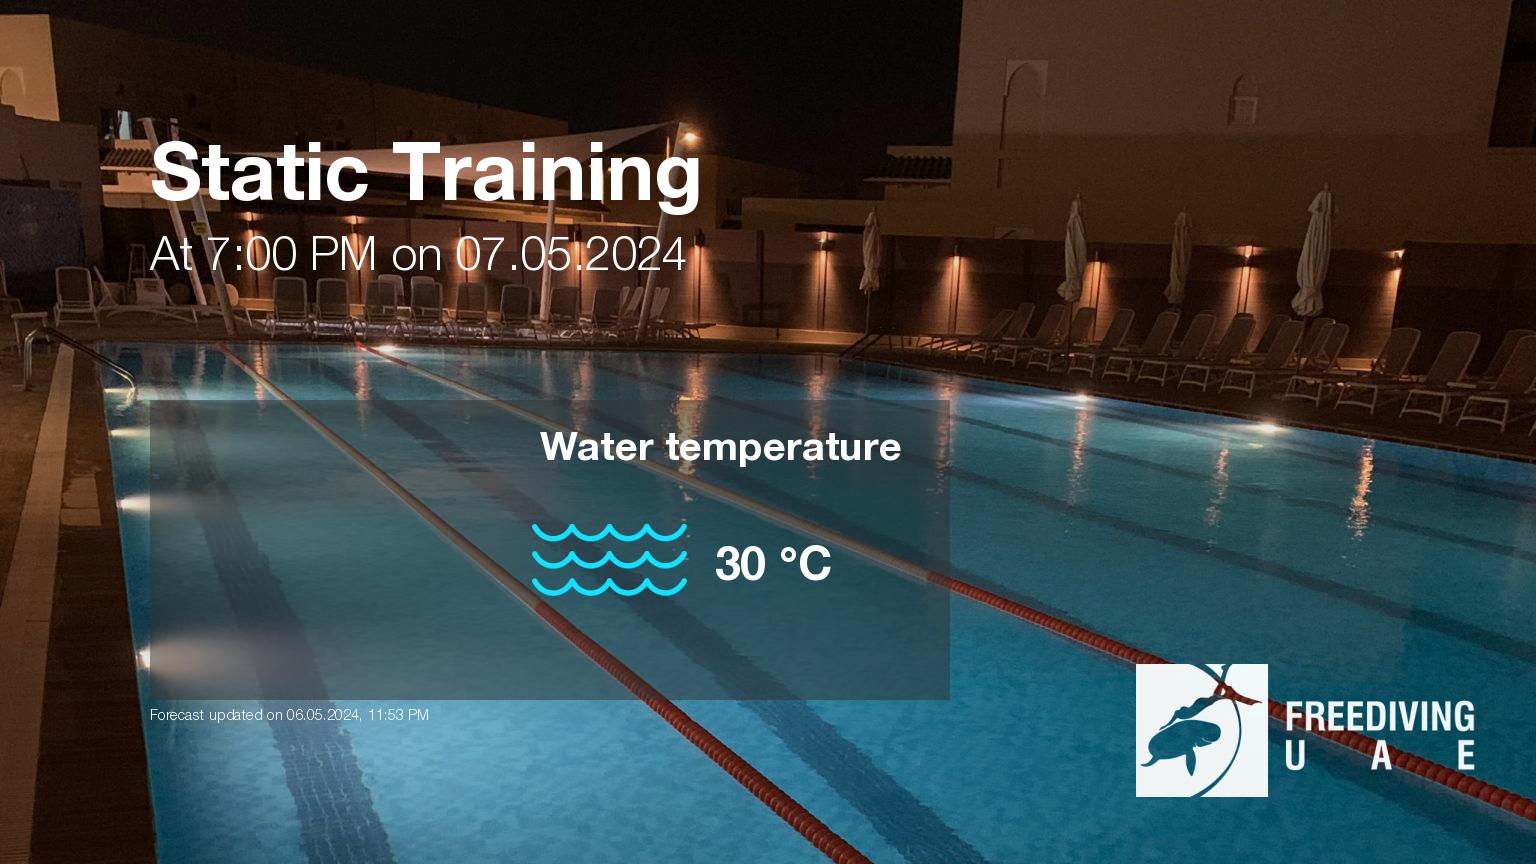 Expected weather during Static Training on Tue, May 7, at 7:00 PM